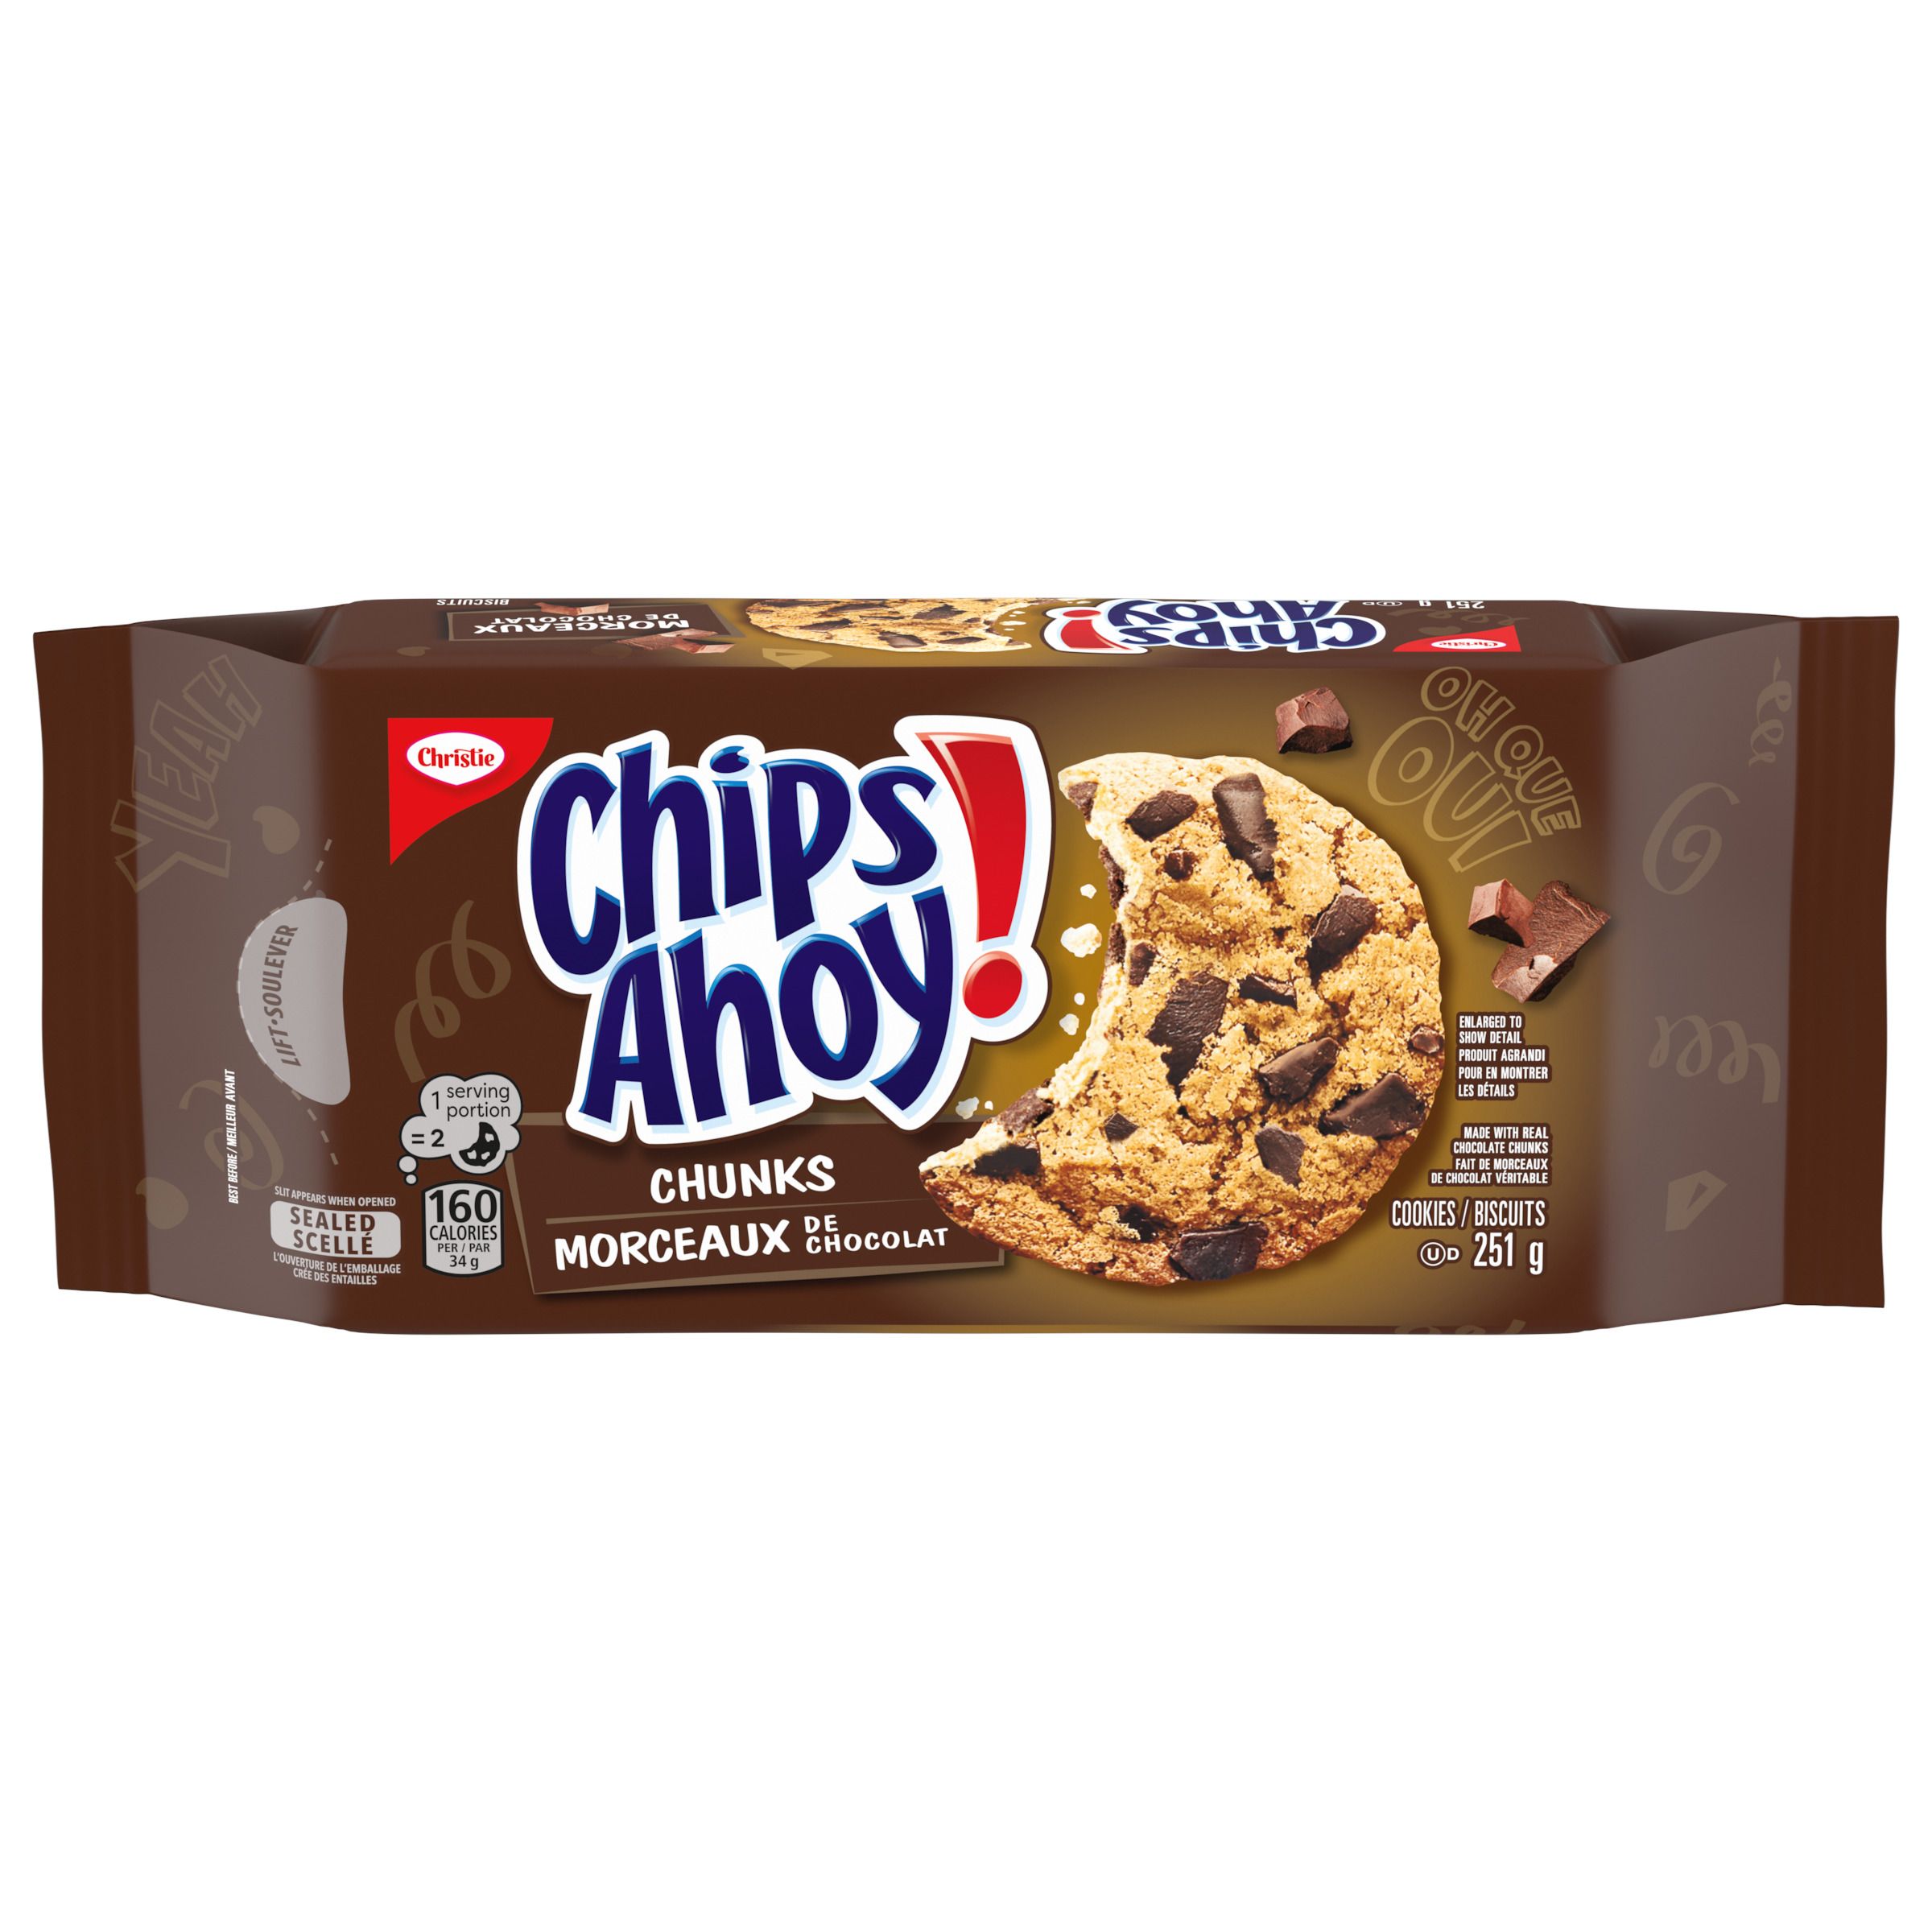 CHIPS AHOY! Chunks Chocolate Chip Cookies 251g-1